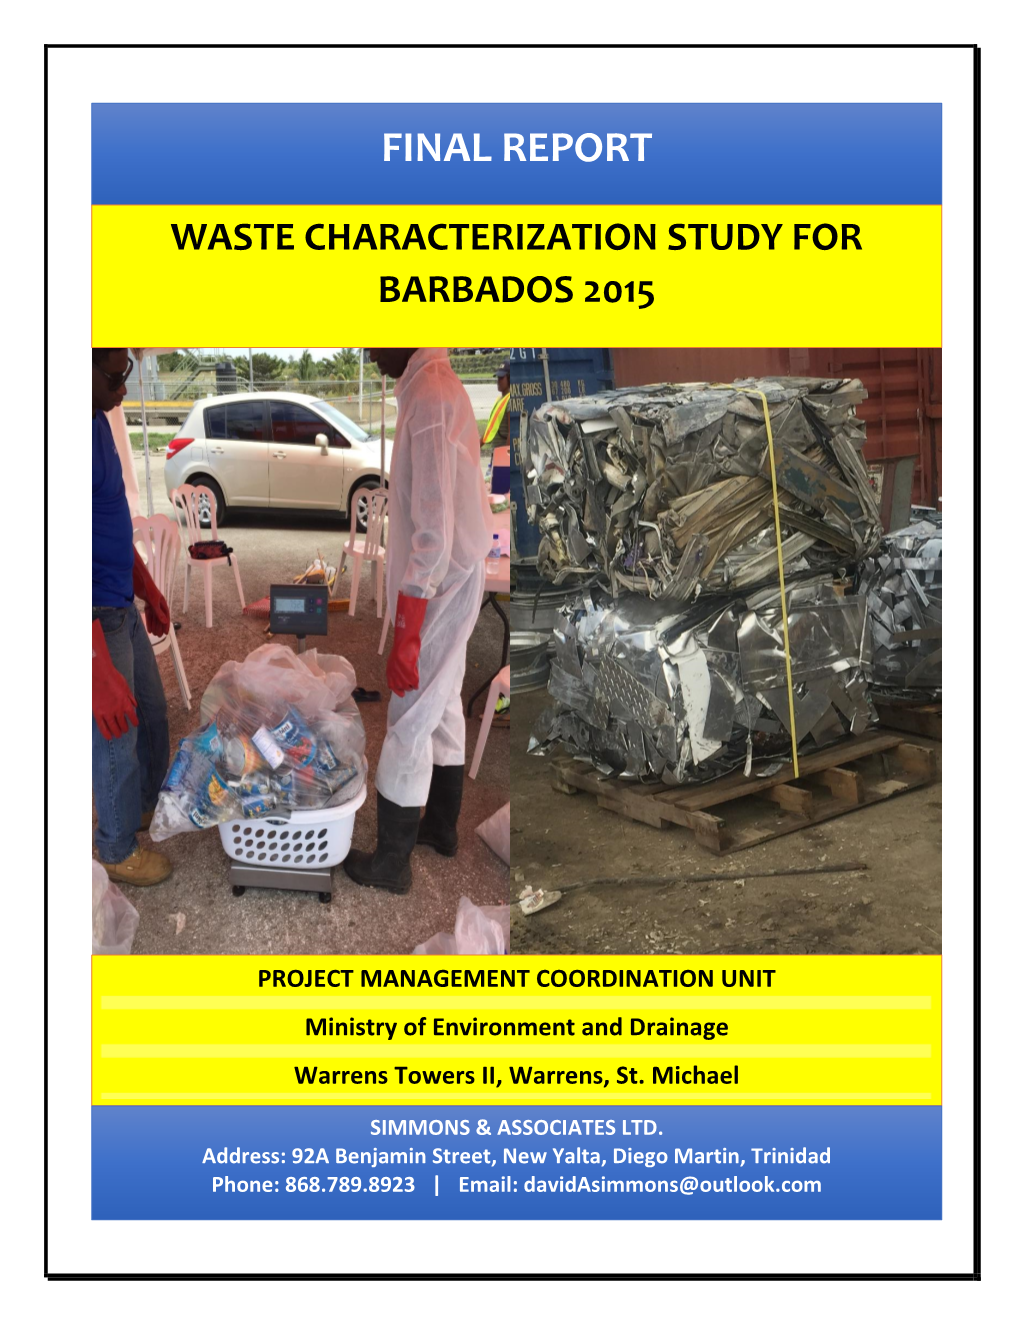 Barbados Waste Characterisation Study 2015: Final Report